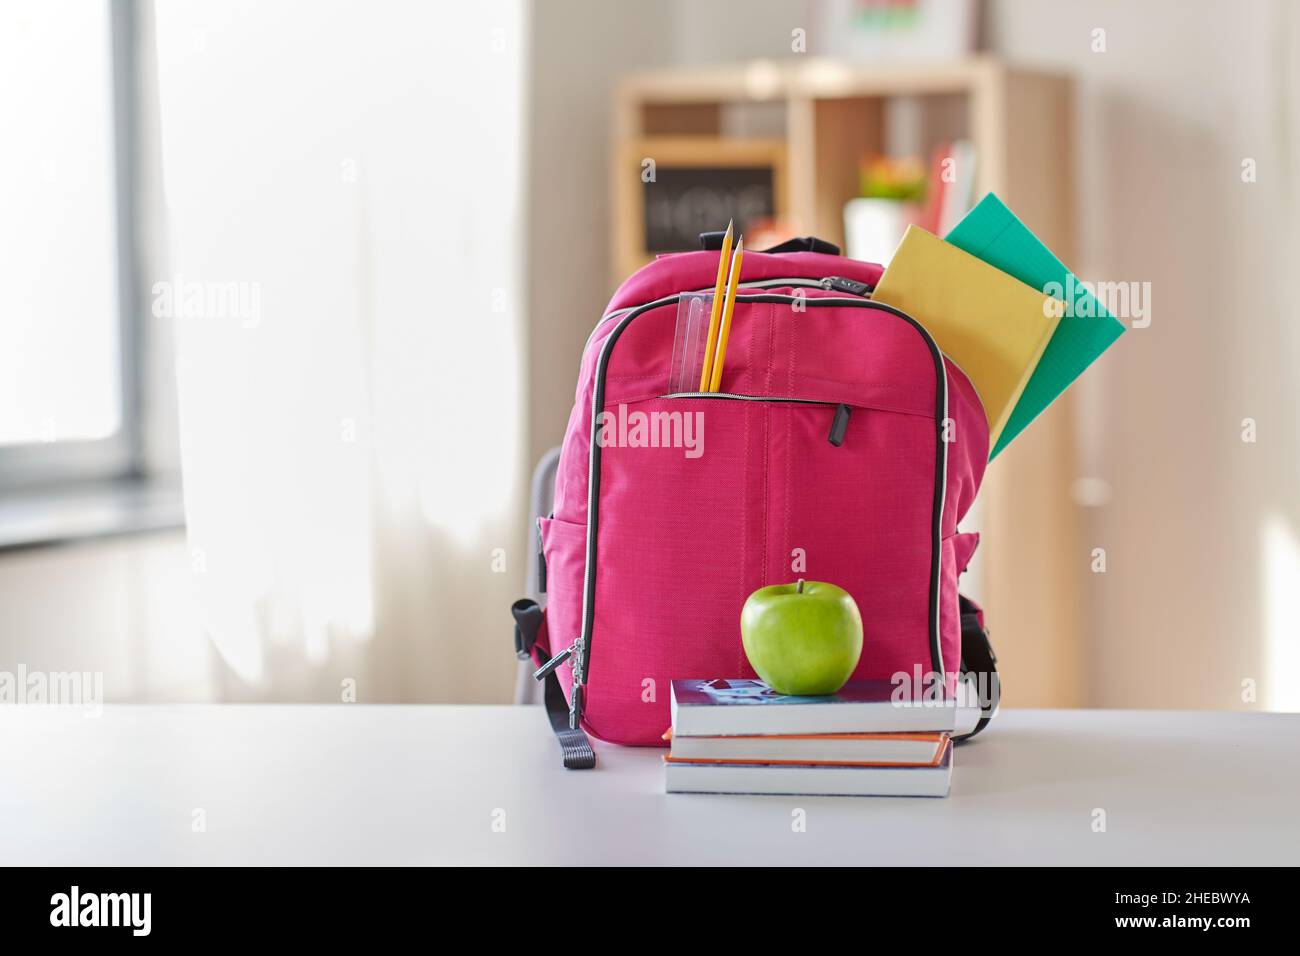 pink backpack, apple and school supplies on table Stock Photo